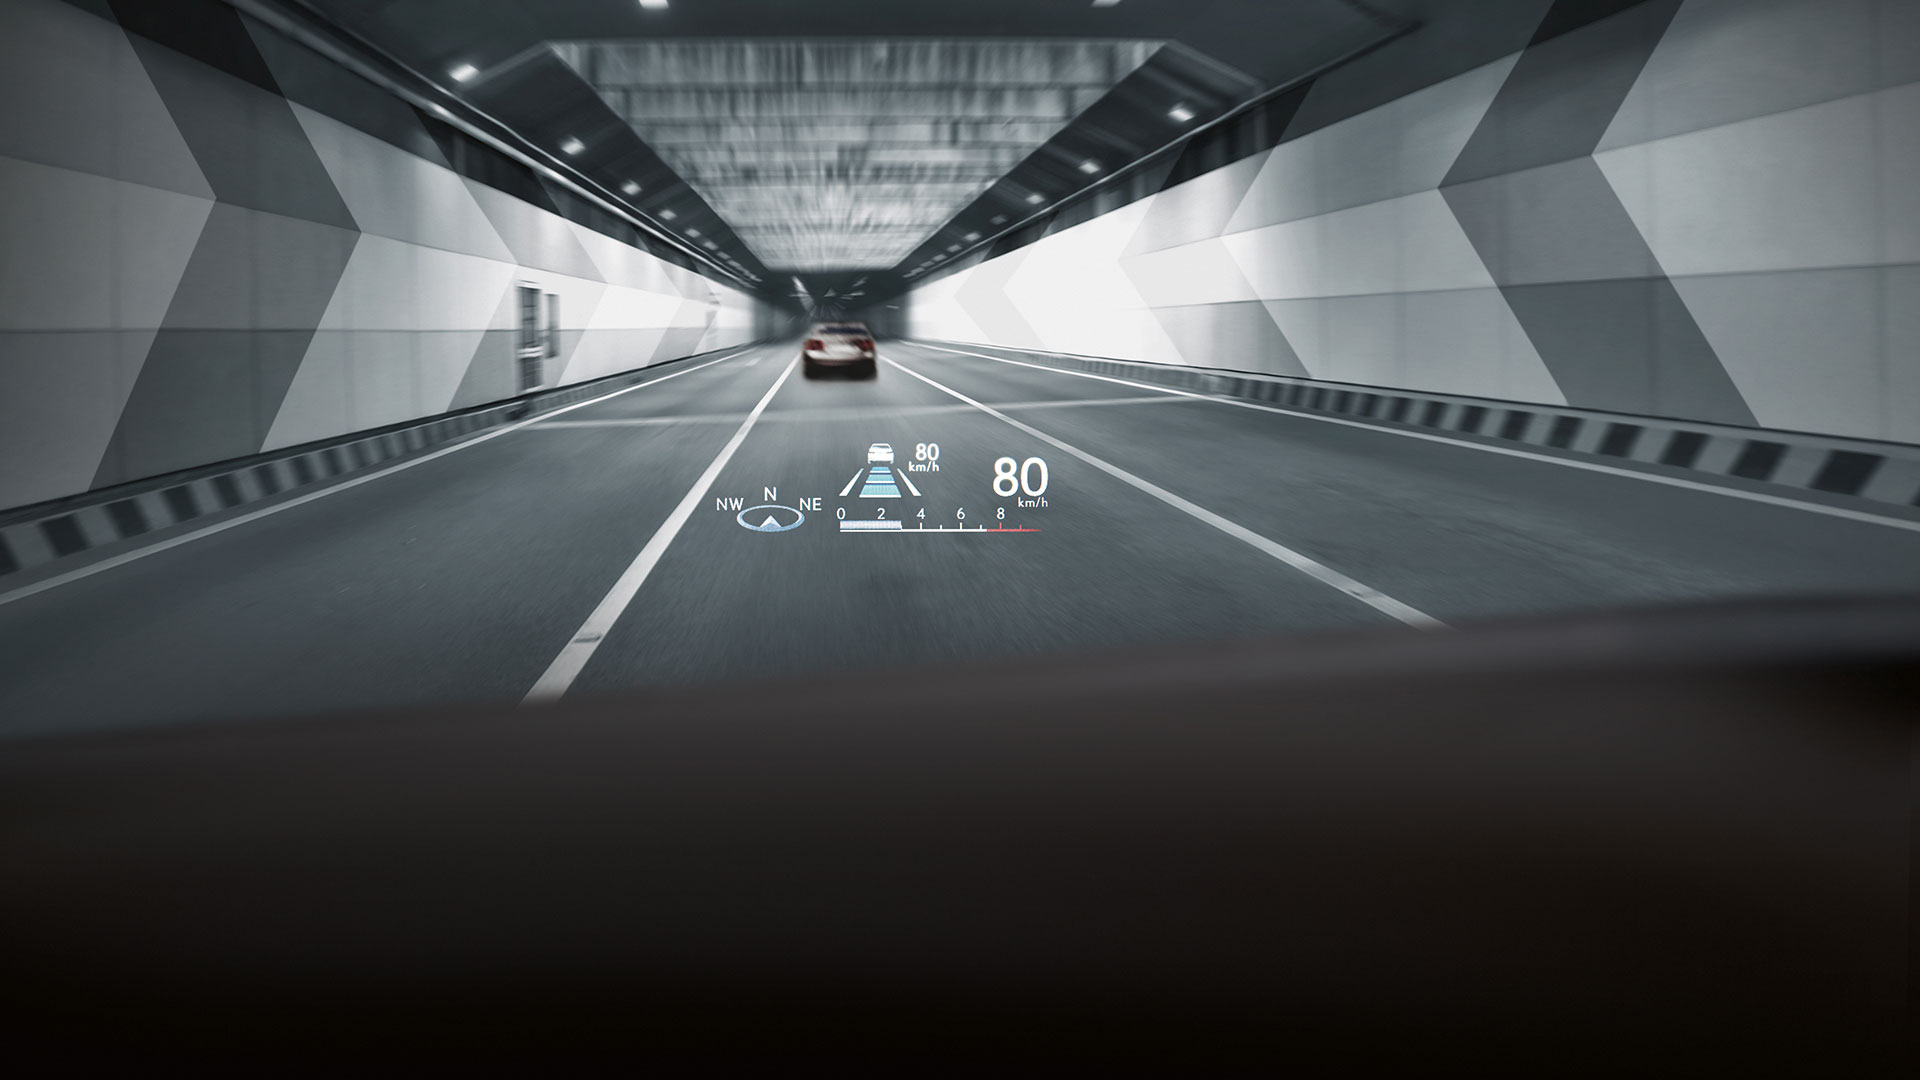 2017-lexus-lc-500-features-extra-wide-head-up-display-1920x1080tcm-3154-1028433